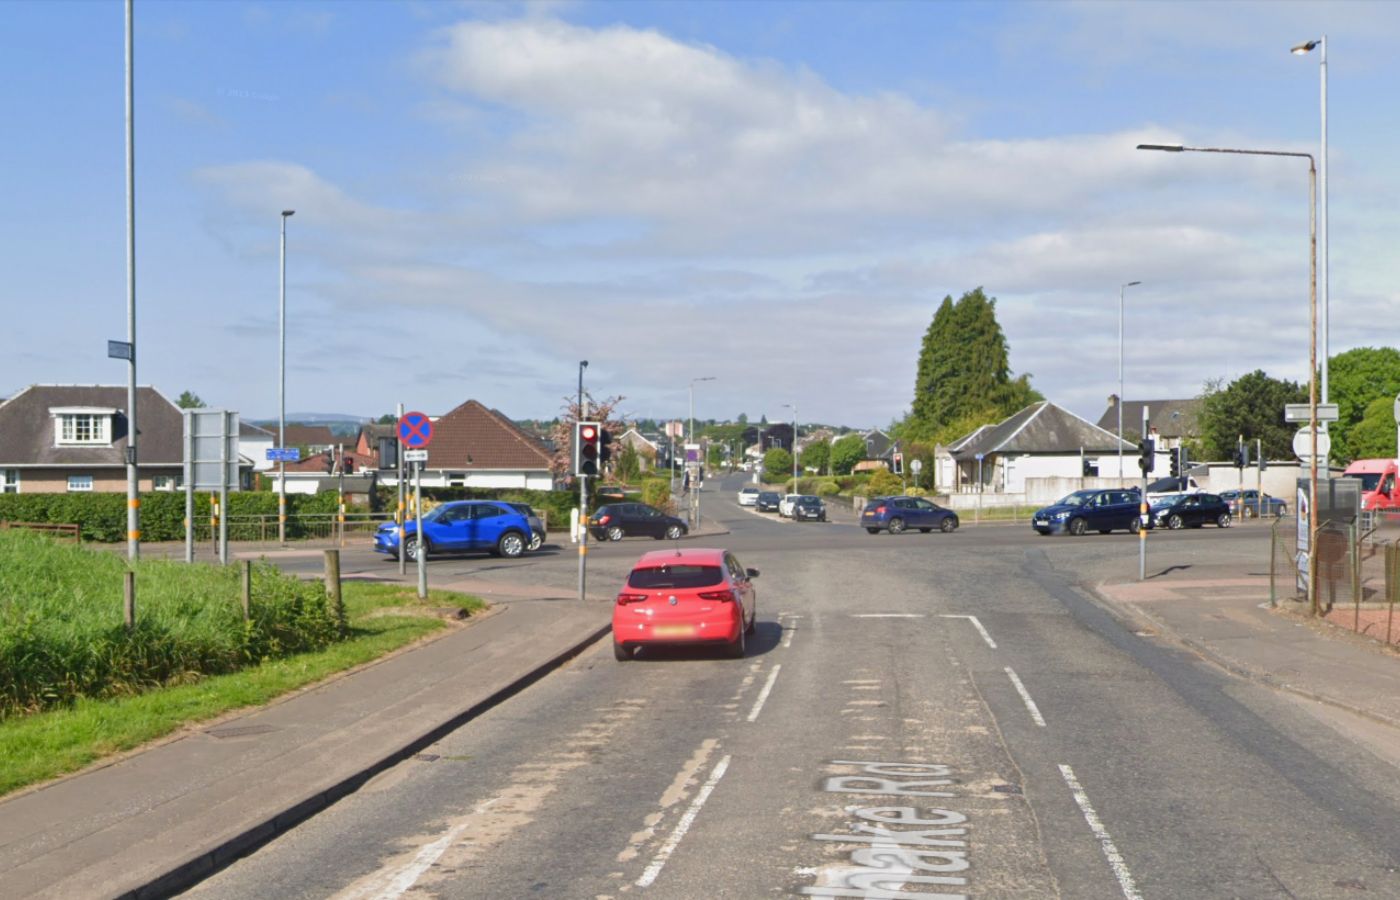 The assault took place on Garshake Road near the A82 at the Stirling Road junction in Dumbarton.